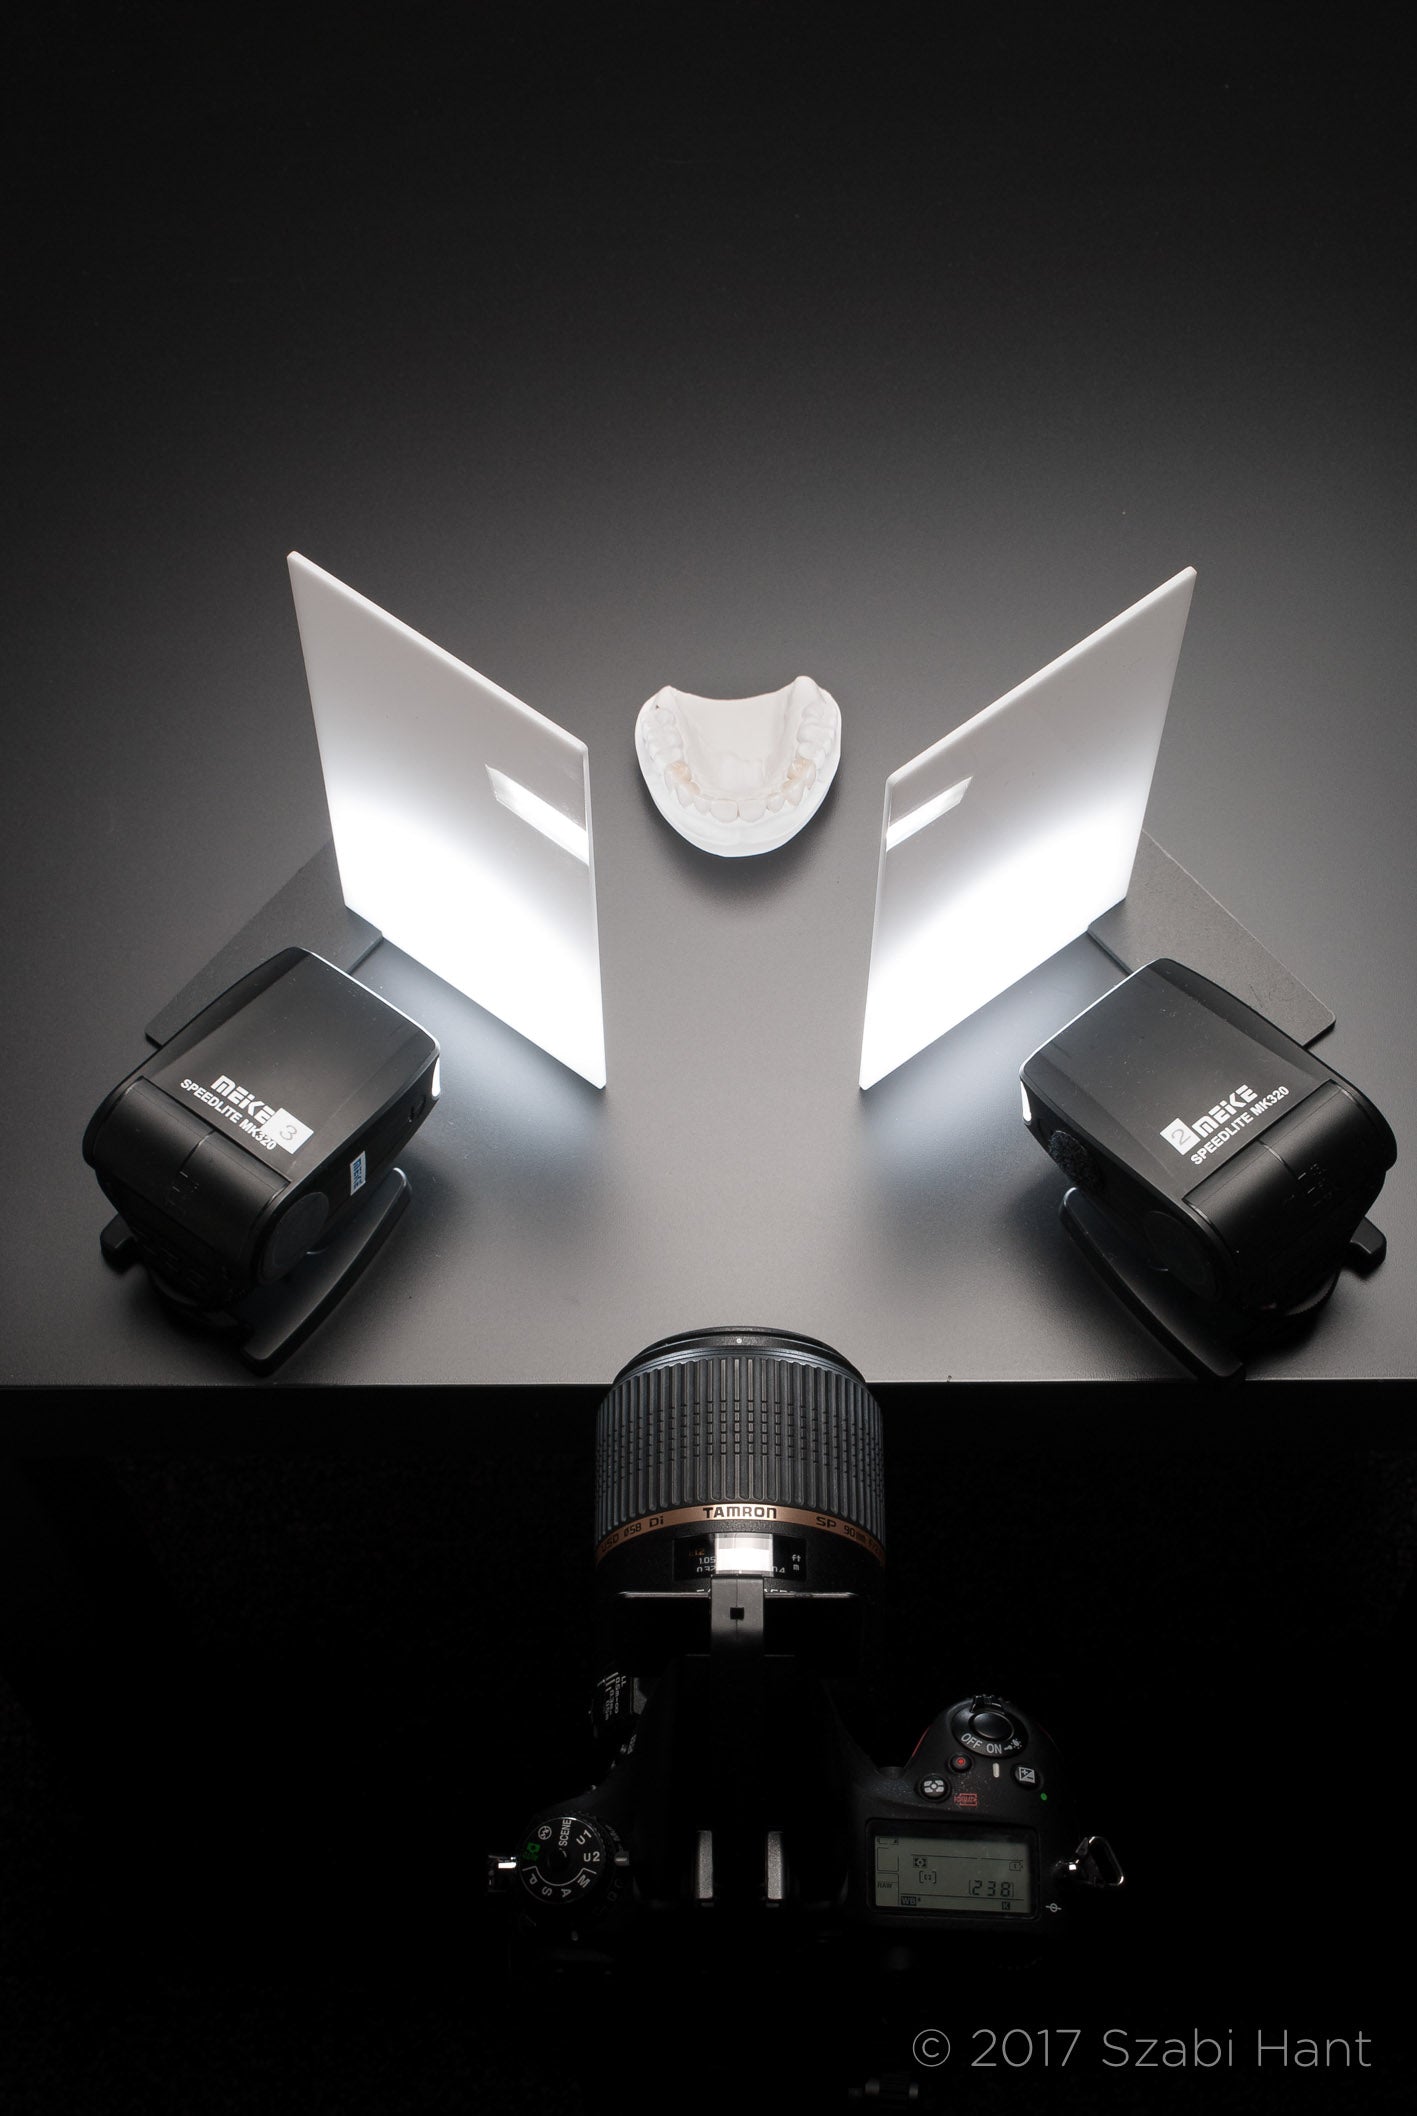 intra.object.diffuser kit